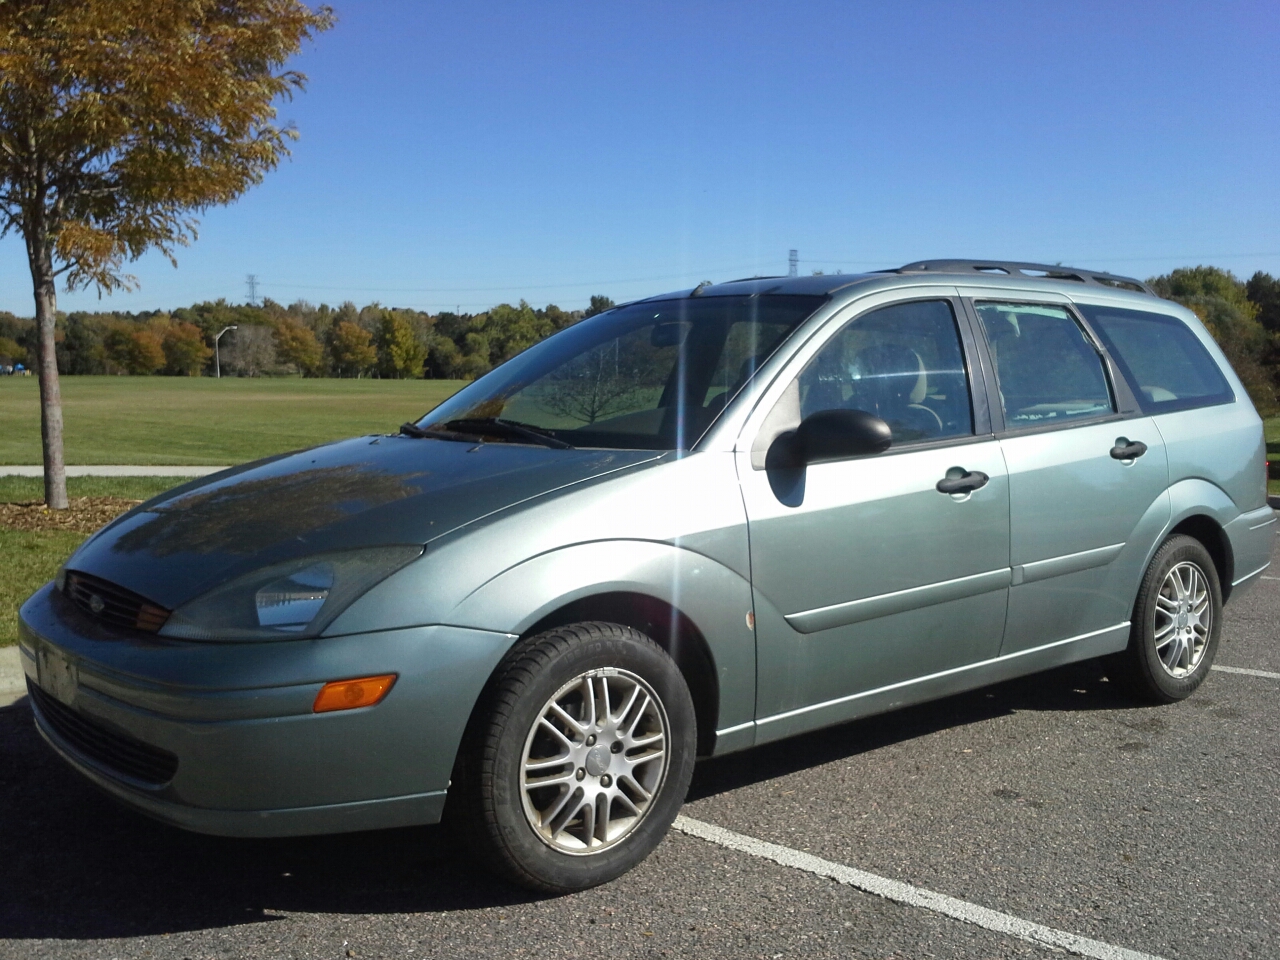 Value of 2003 ford focus wagon